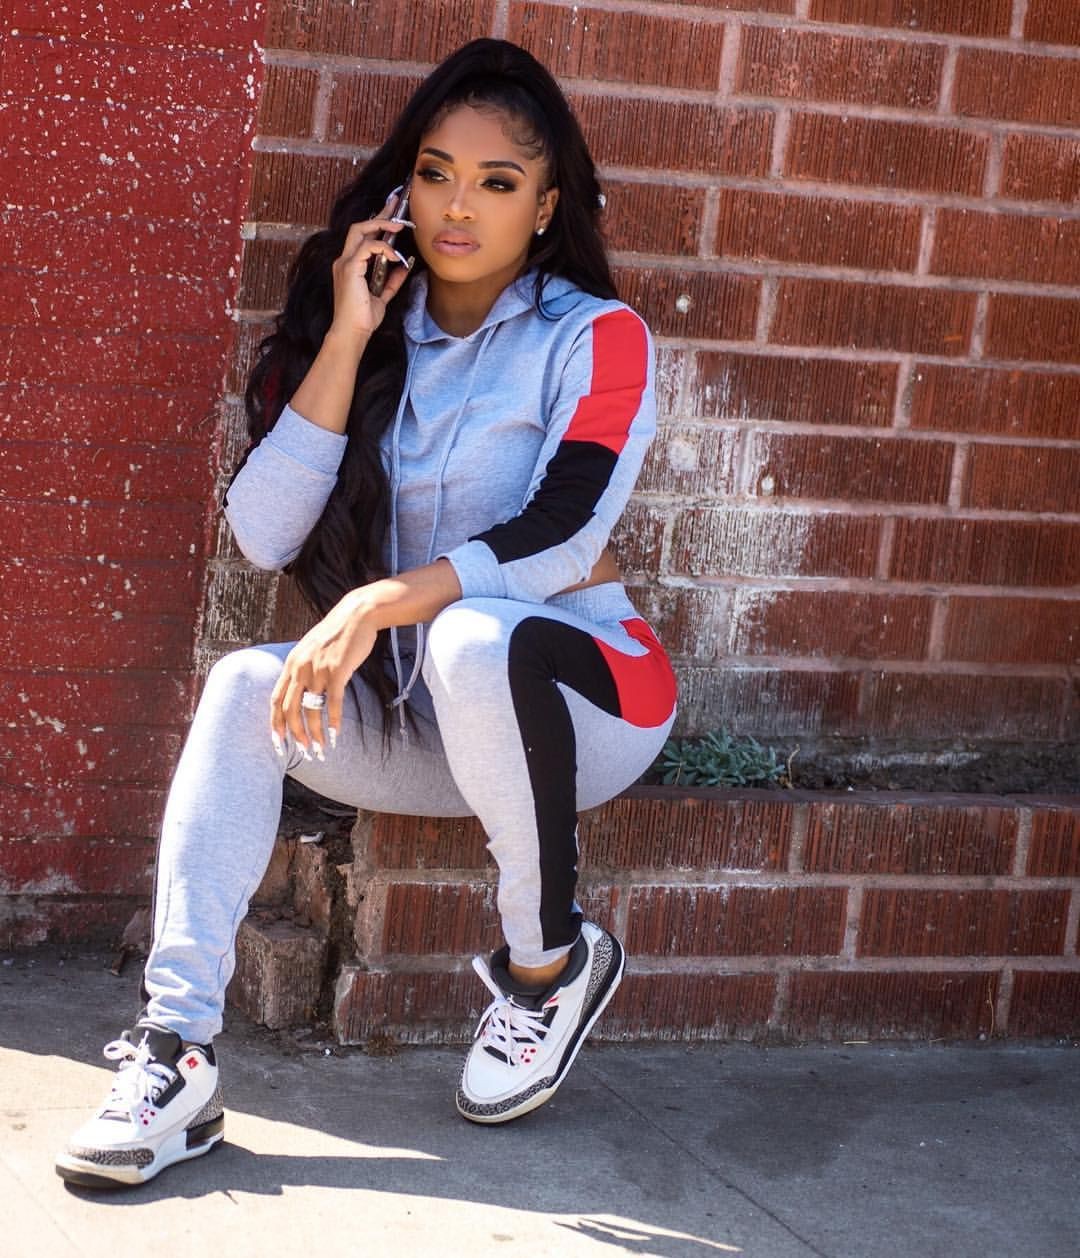 Female Outfits With Jordan 11 Concord Girls: Bralette Outfits,  Cute Jordans Outfits,  Jordans Outfits  